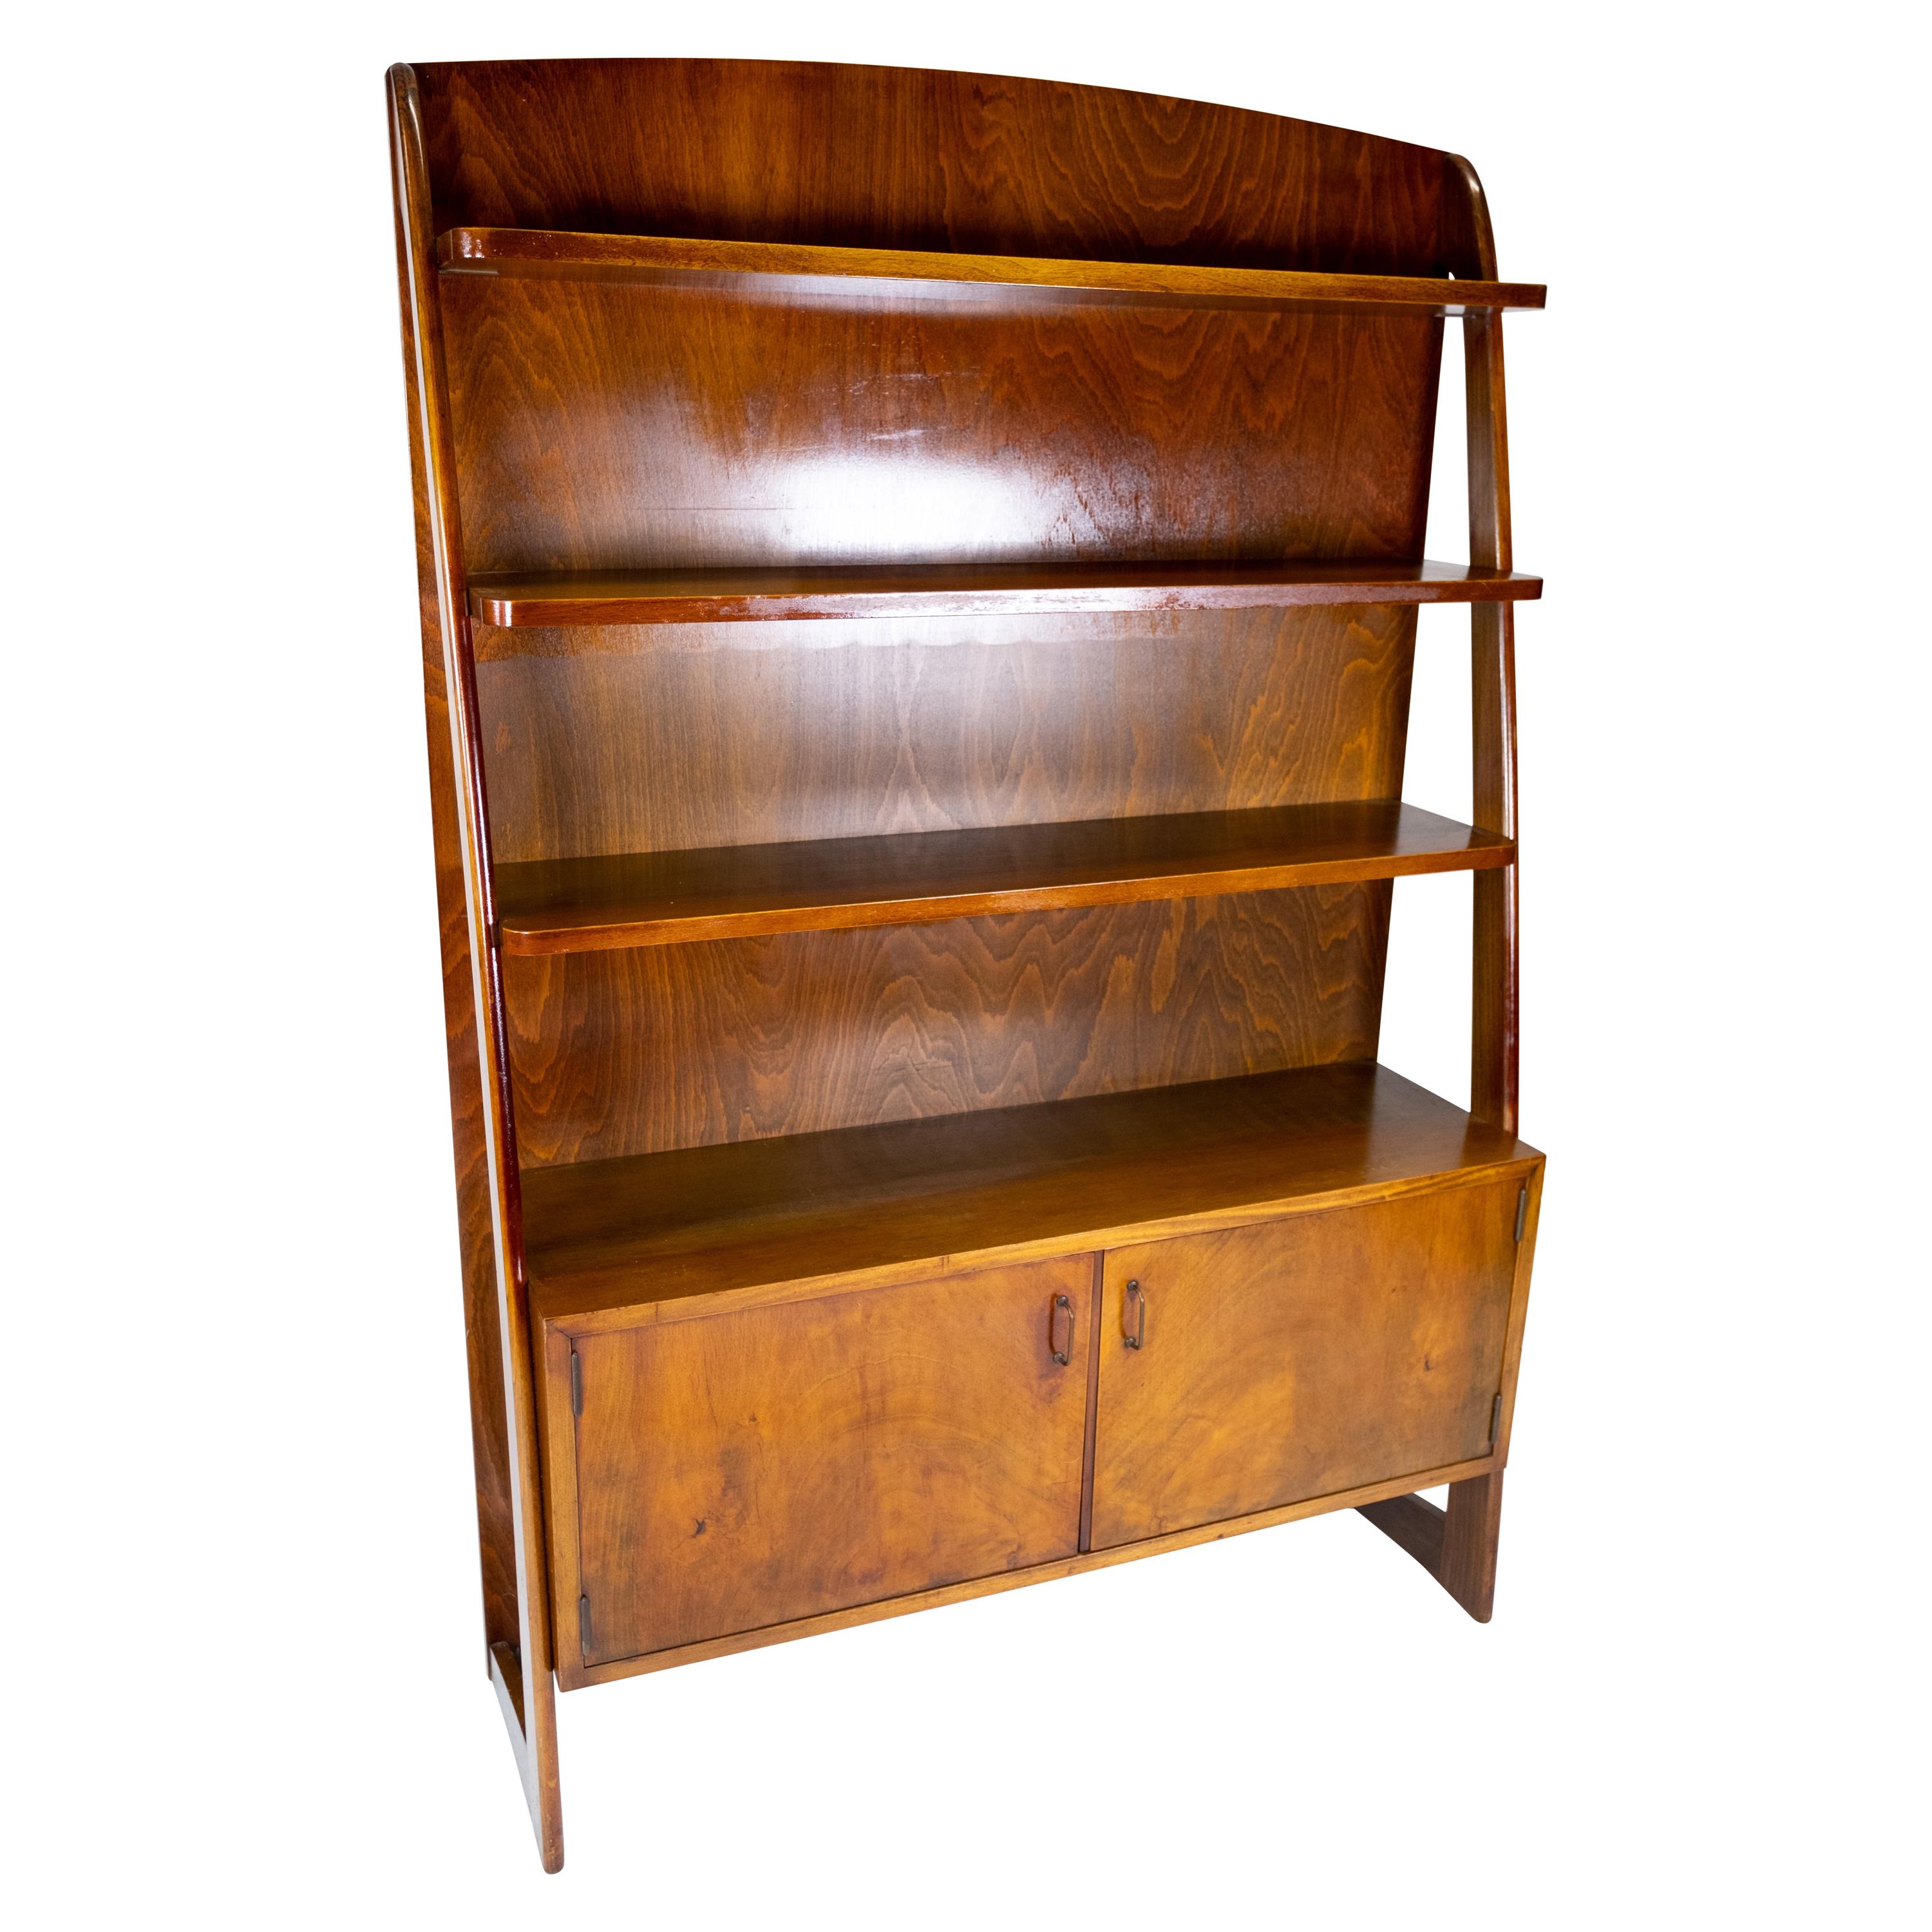 Bookcase with Cabinet Beneath in Walnut of Danish Design from the 1950s